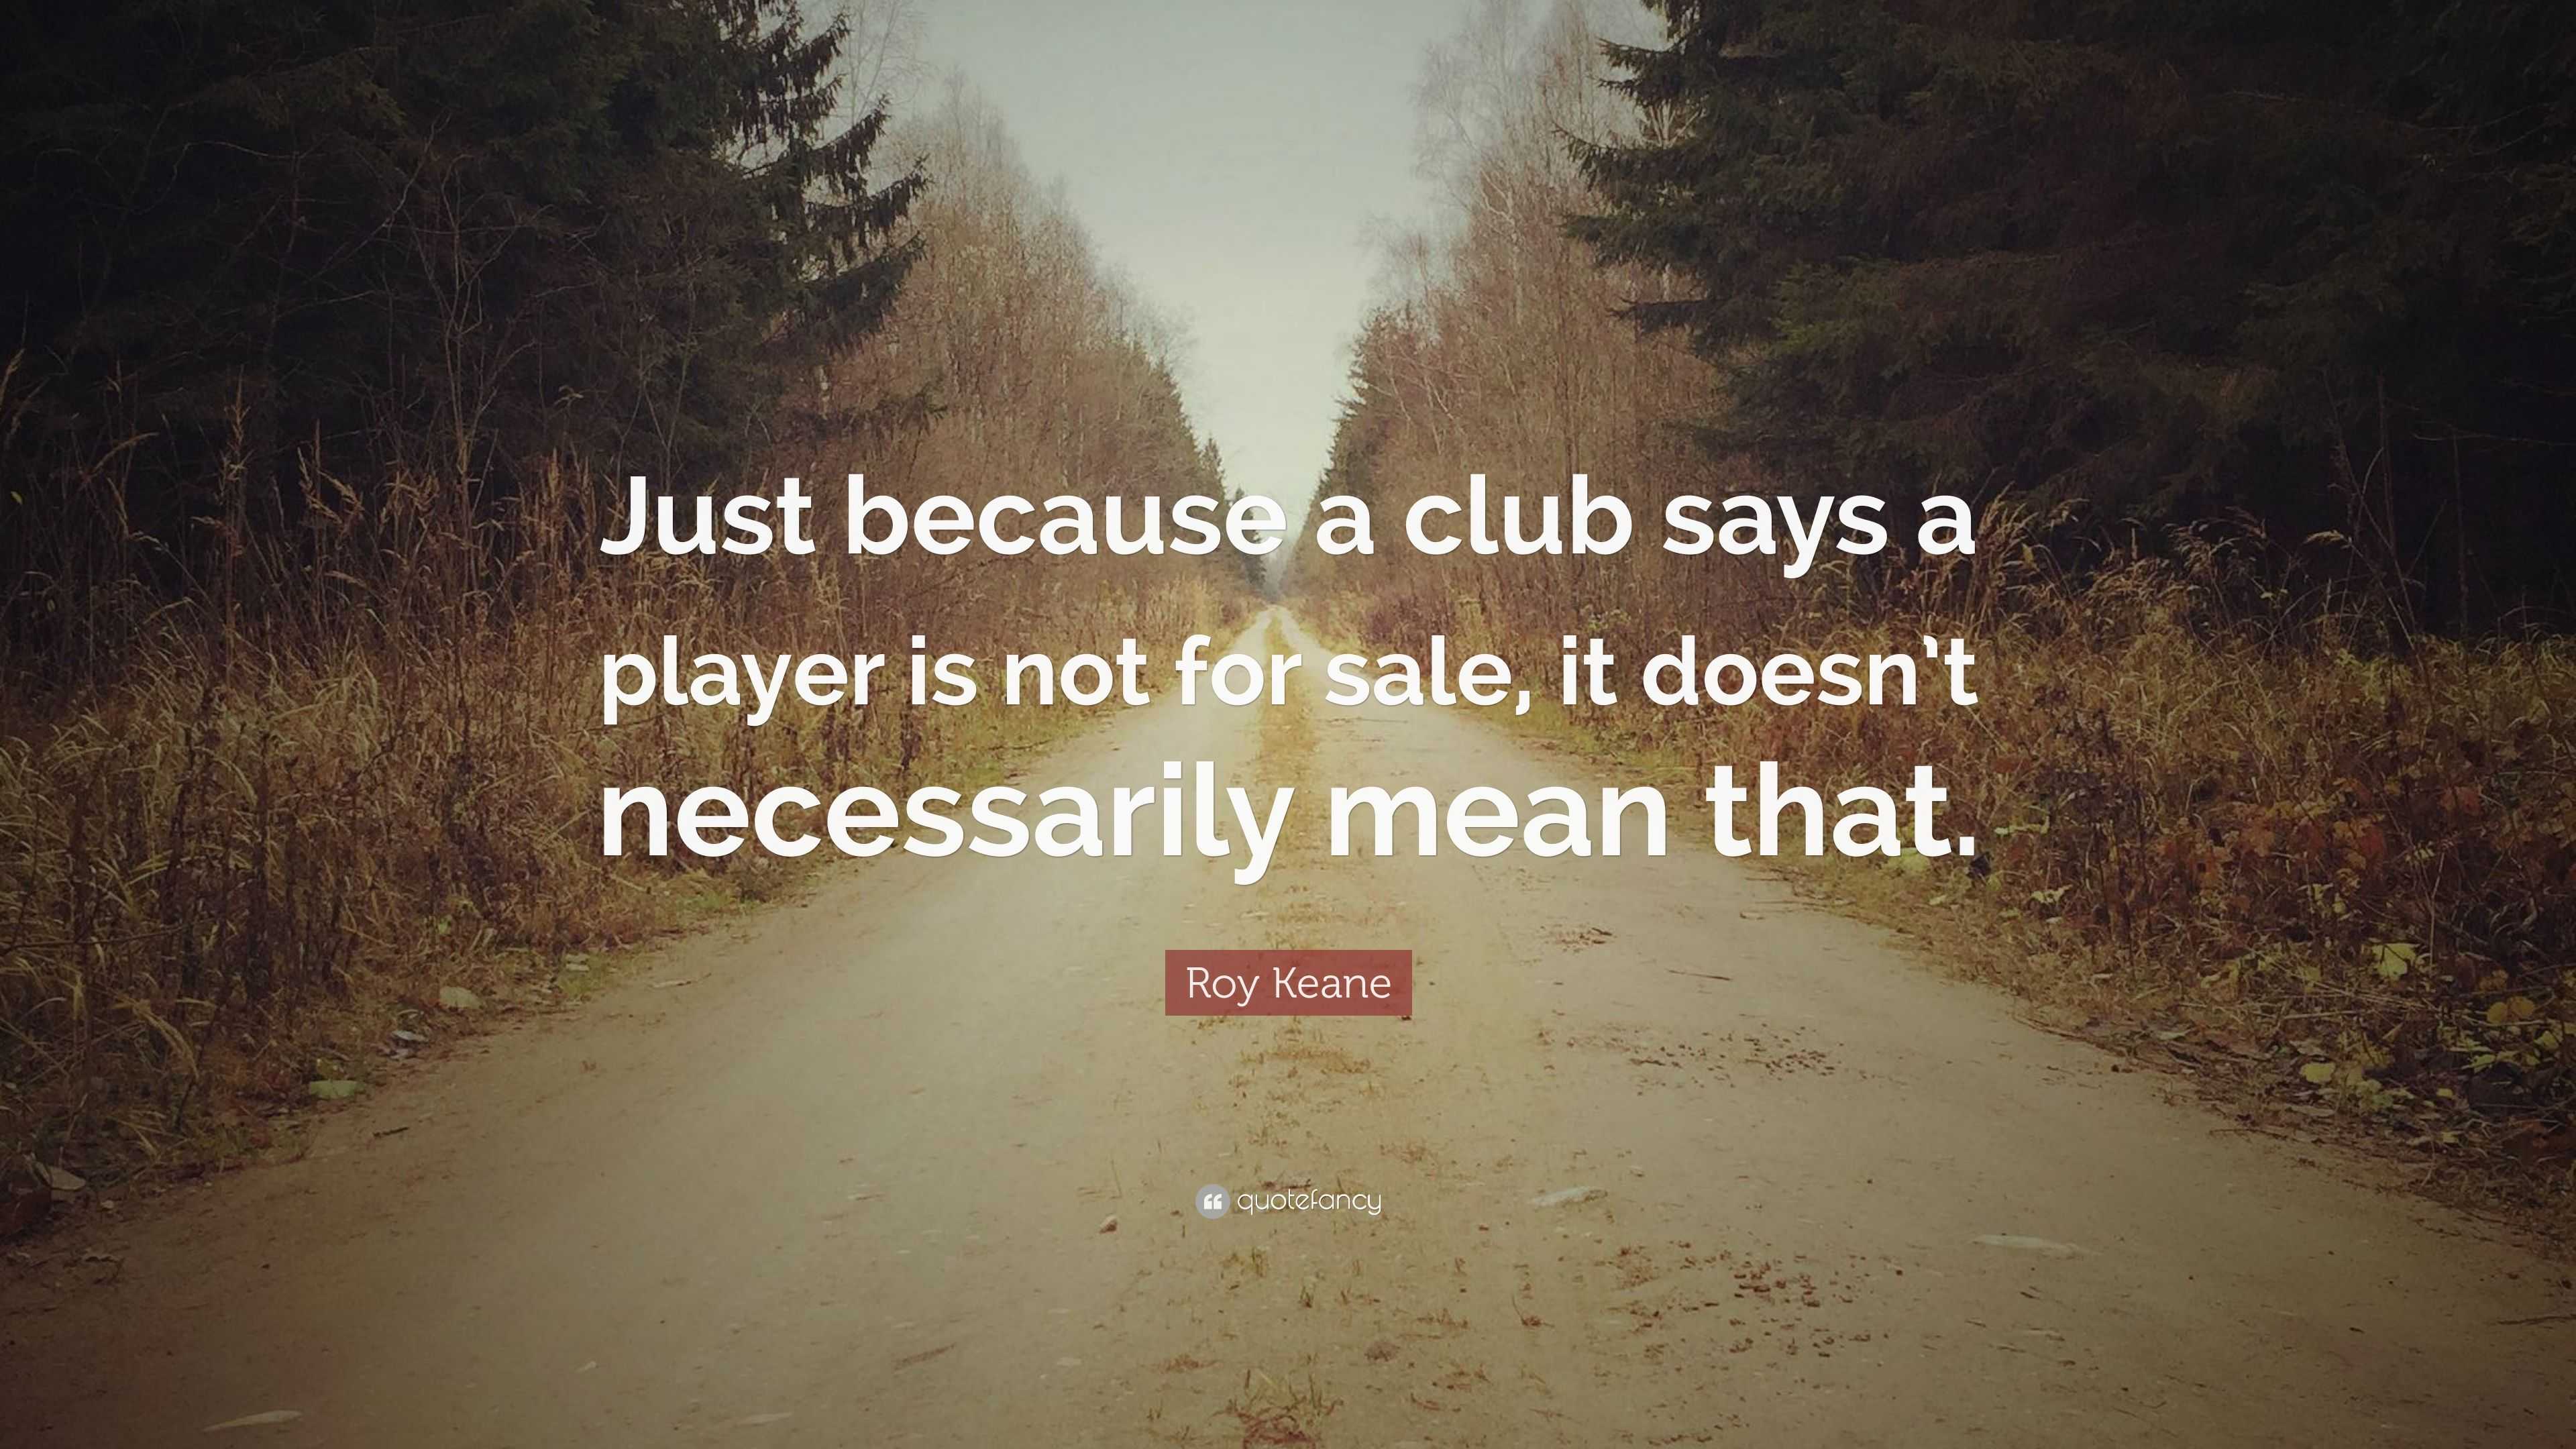 Roy Keane Quote: “Just because a club says a player is not for sale, it ...